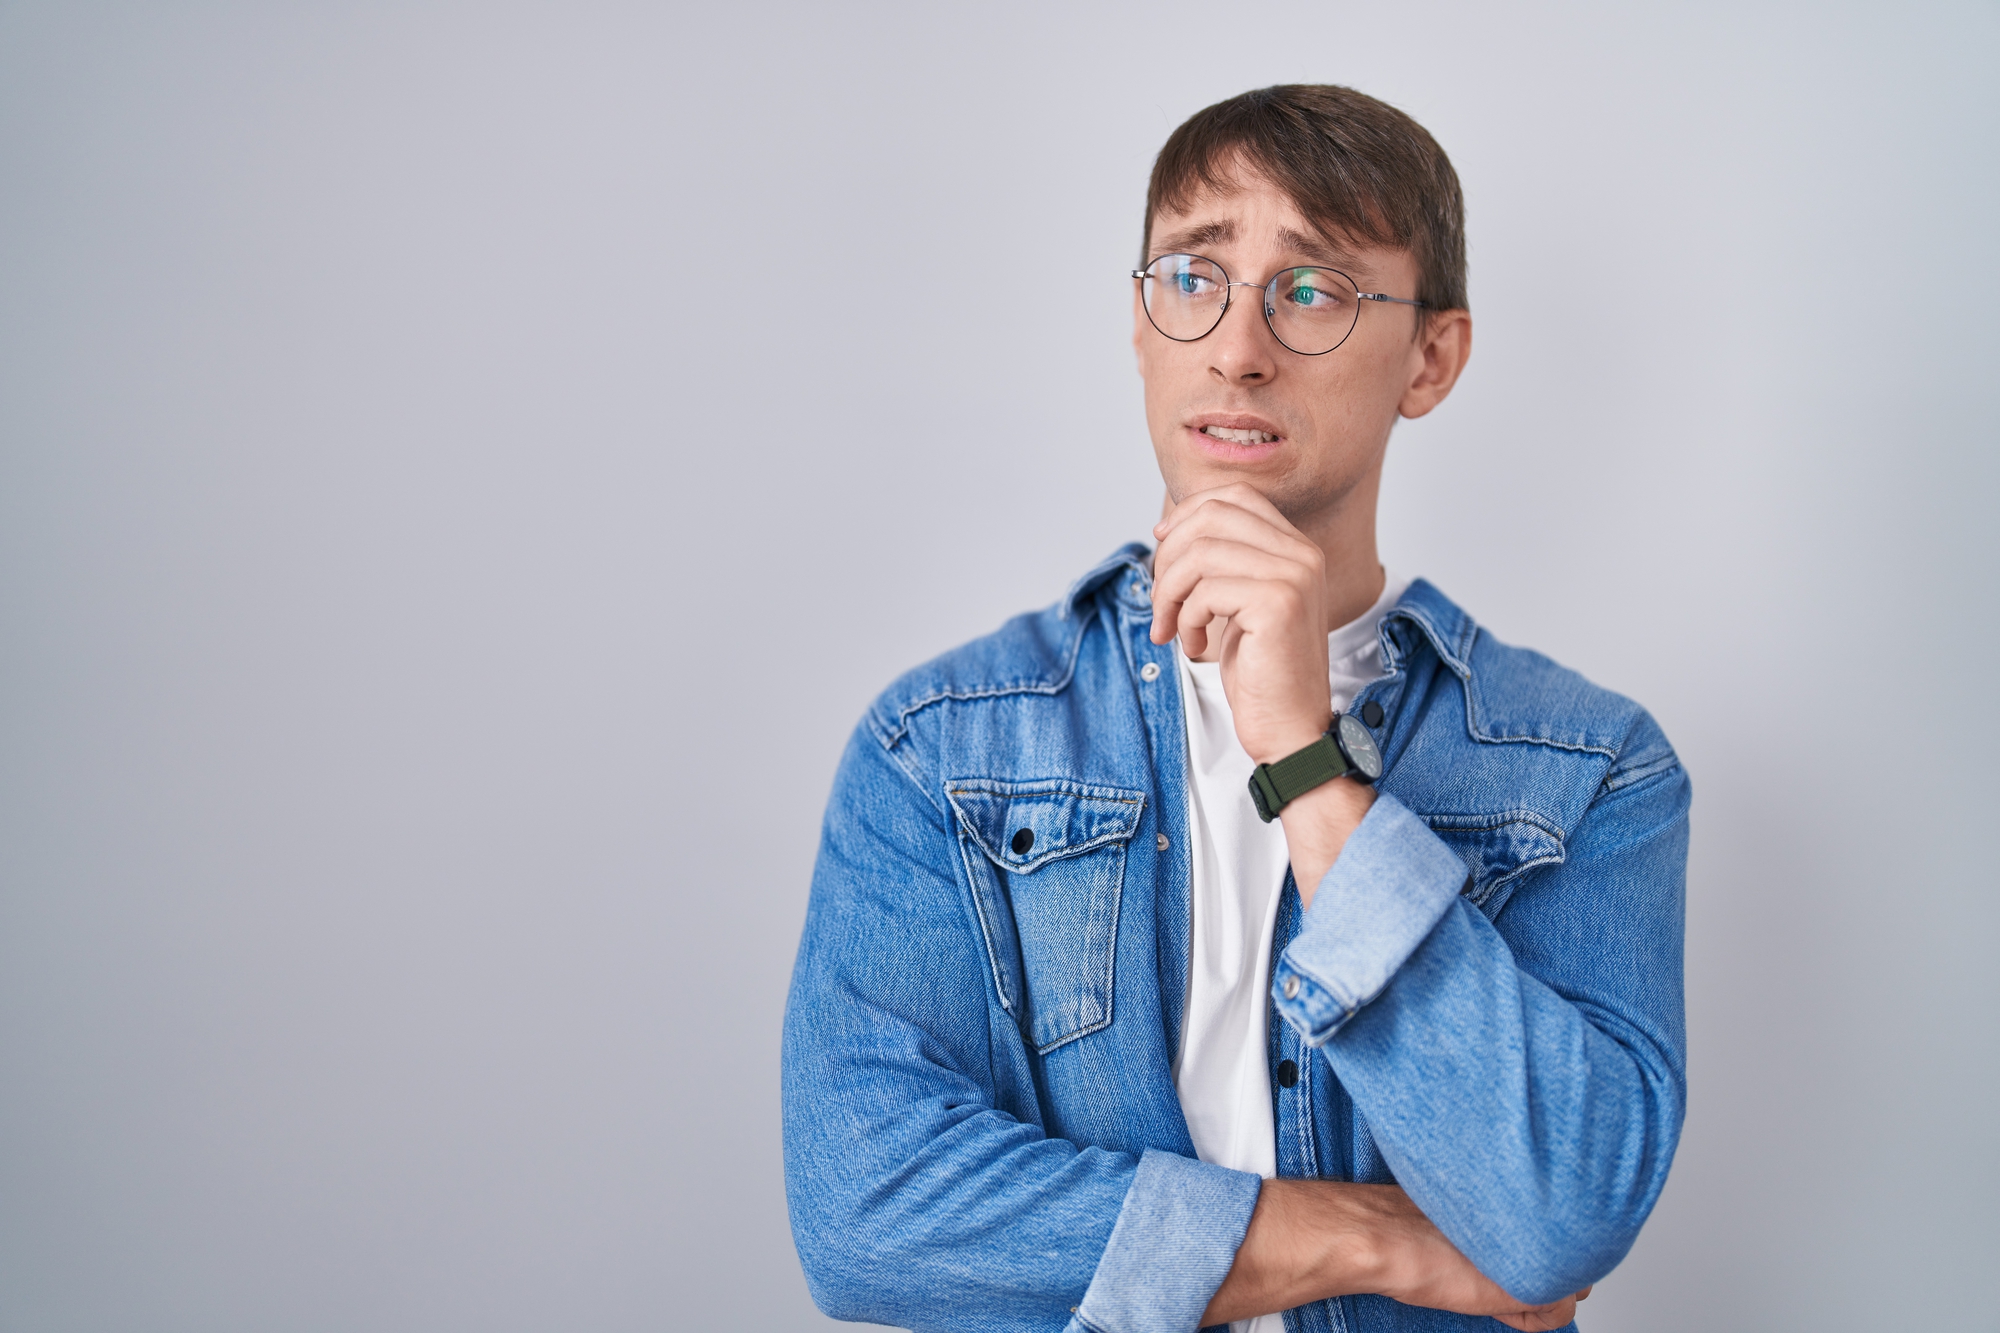 A man with short brown hair wearing round glasses, a denim jacket, and a white T-shirt stands against a plain light gray background. He has one hand resting on his chin and looks to the side with a thoughtful expression.